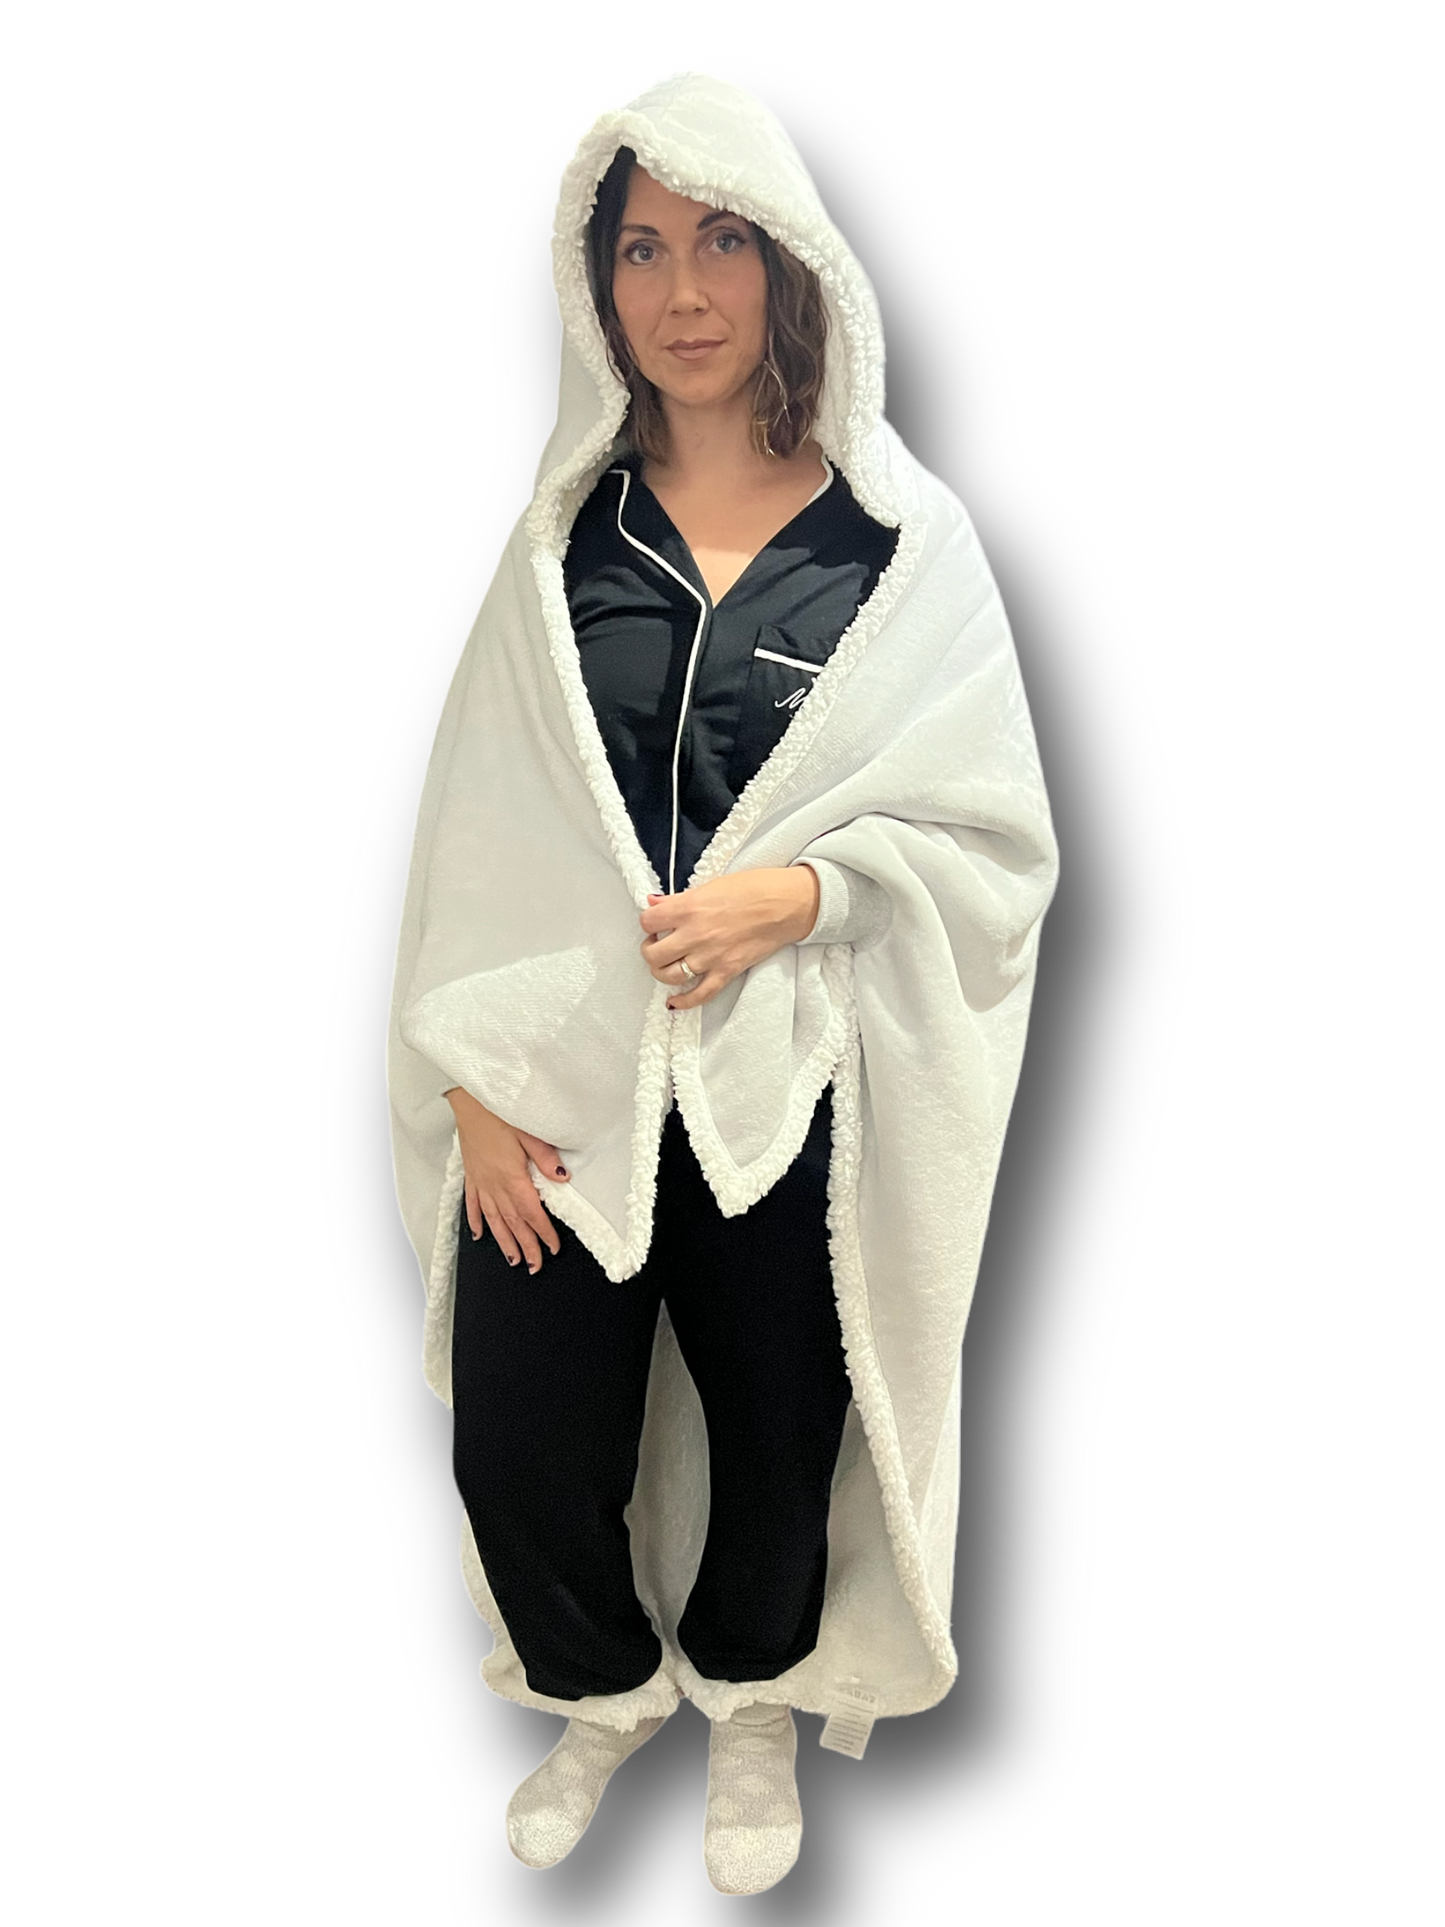 CwtchCape Sherpa fleece hoodie walkie blanket Adult 1 size fits all - 4 Colours